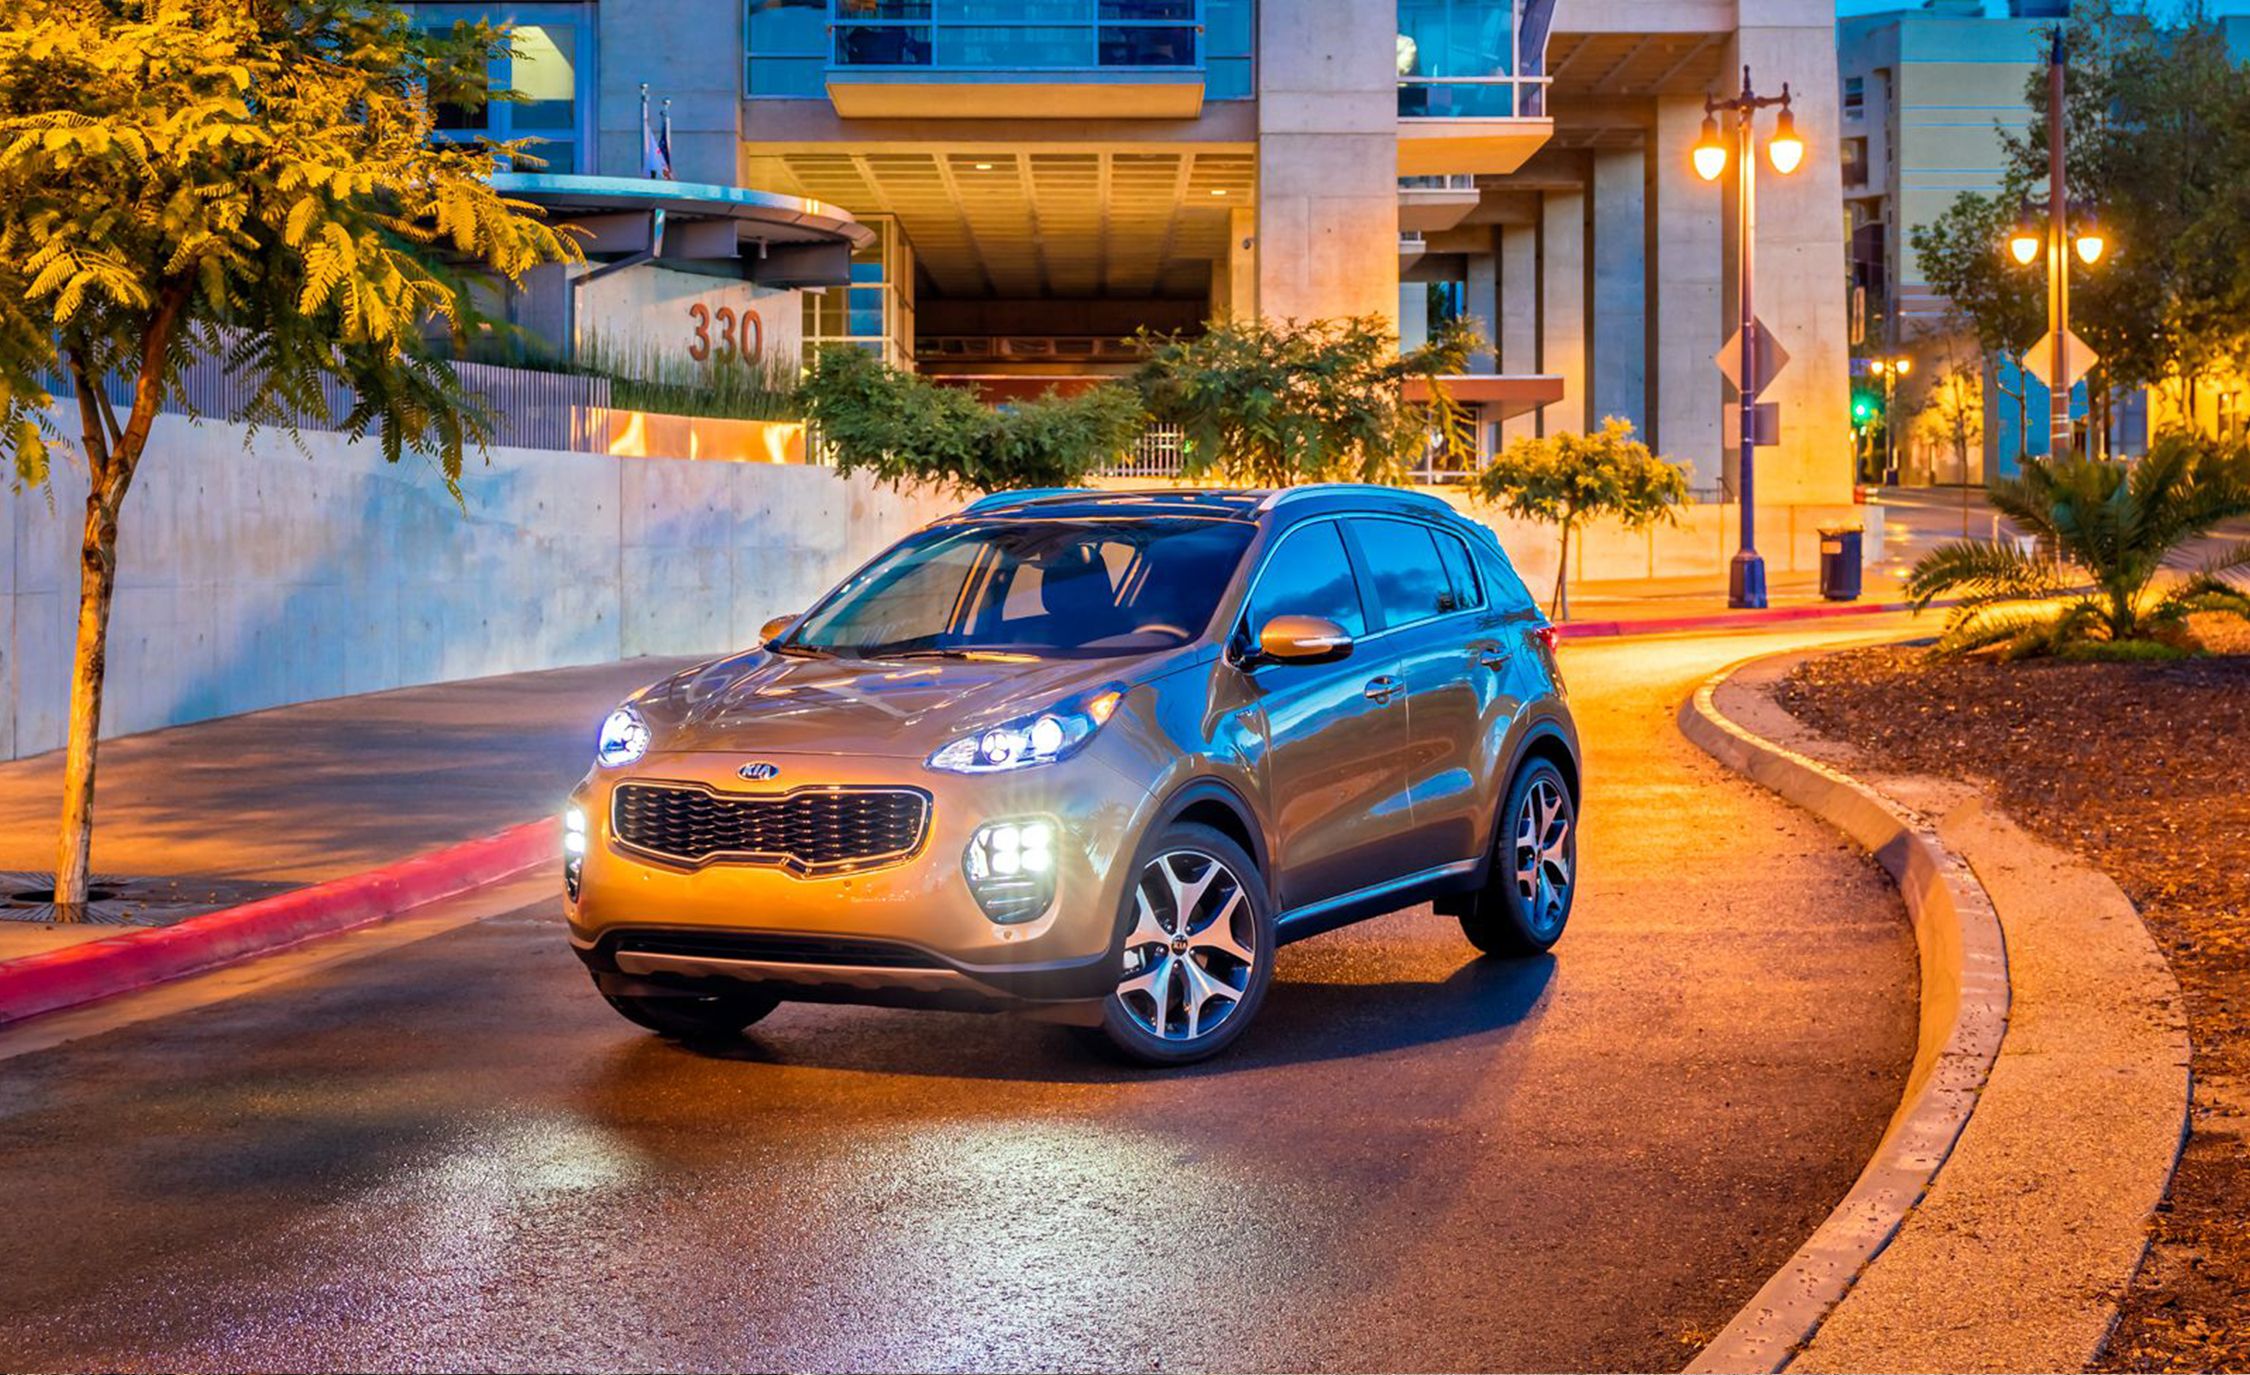 Kia Sportage 2018 pricing and specs confirmed - Car News